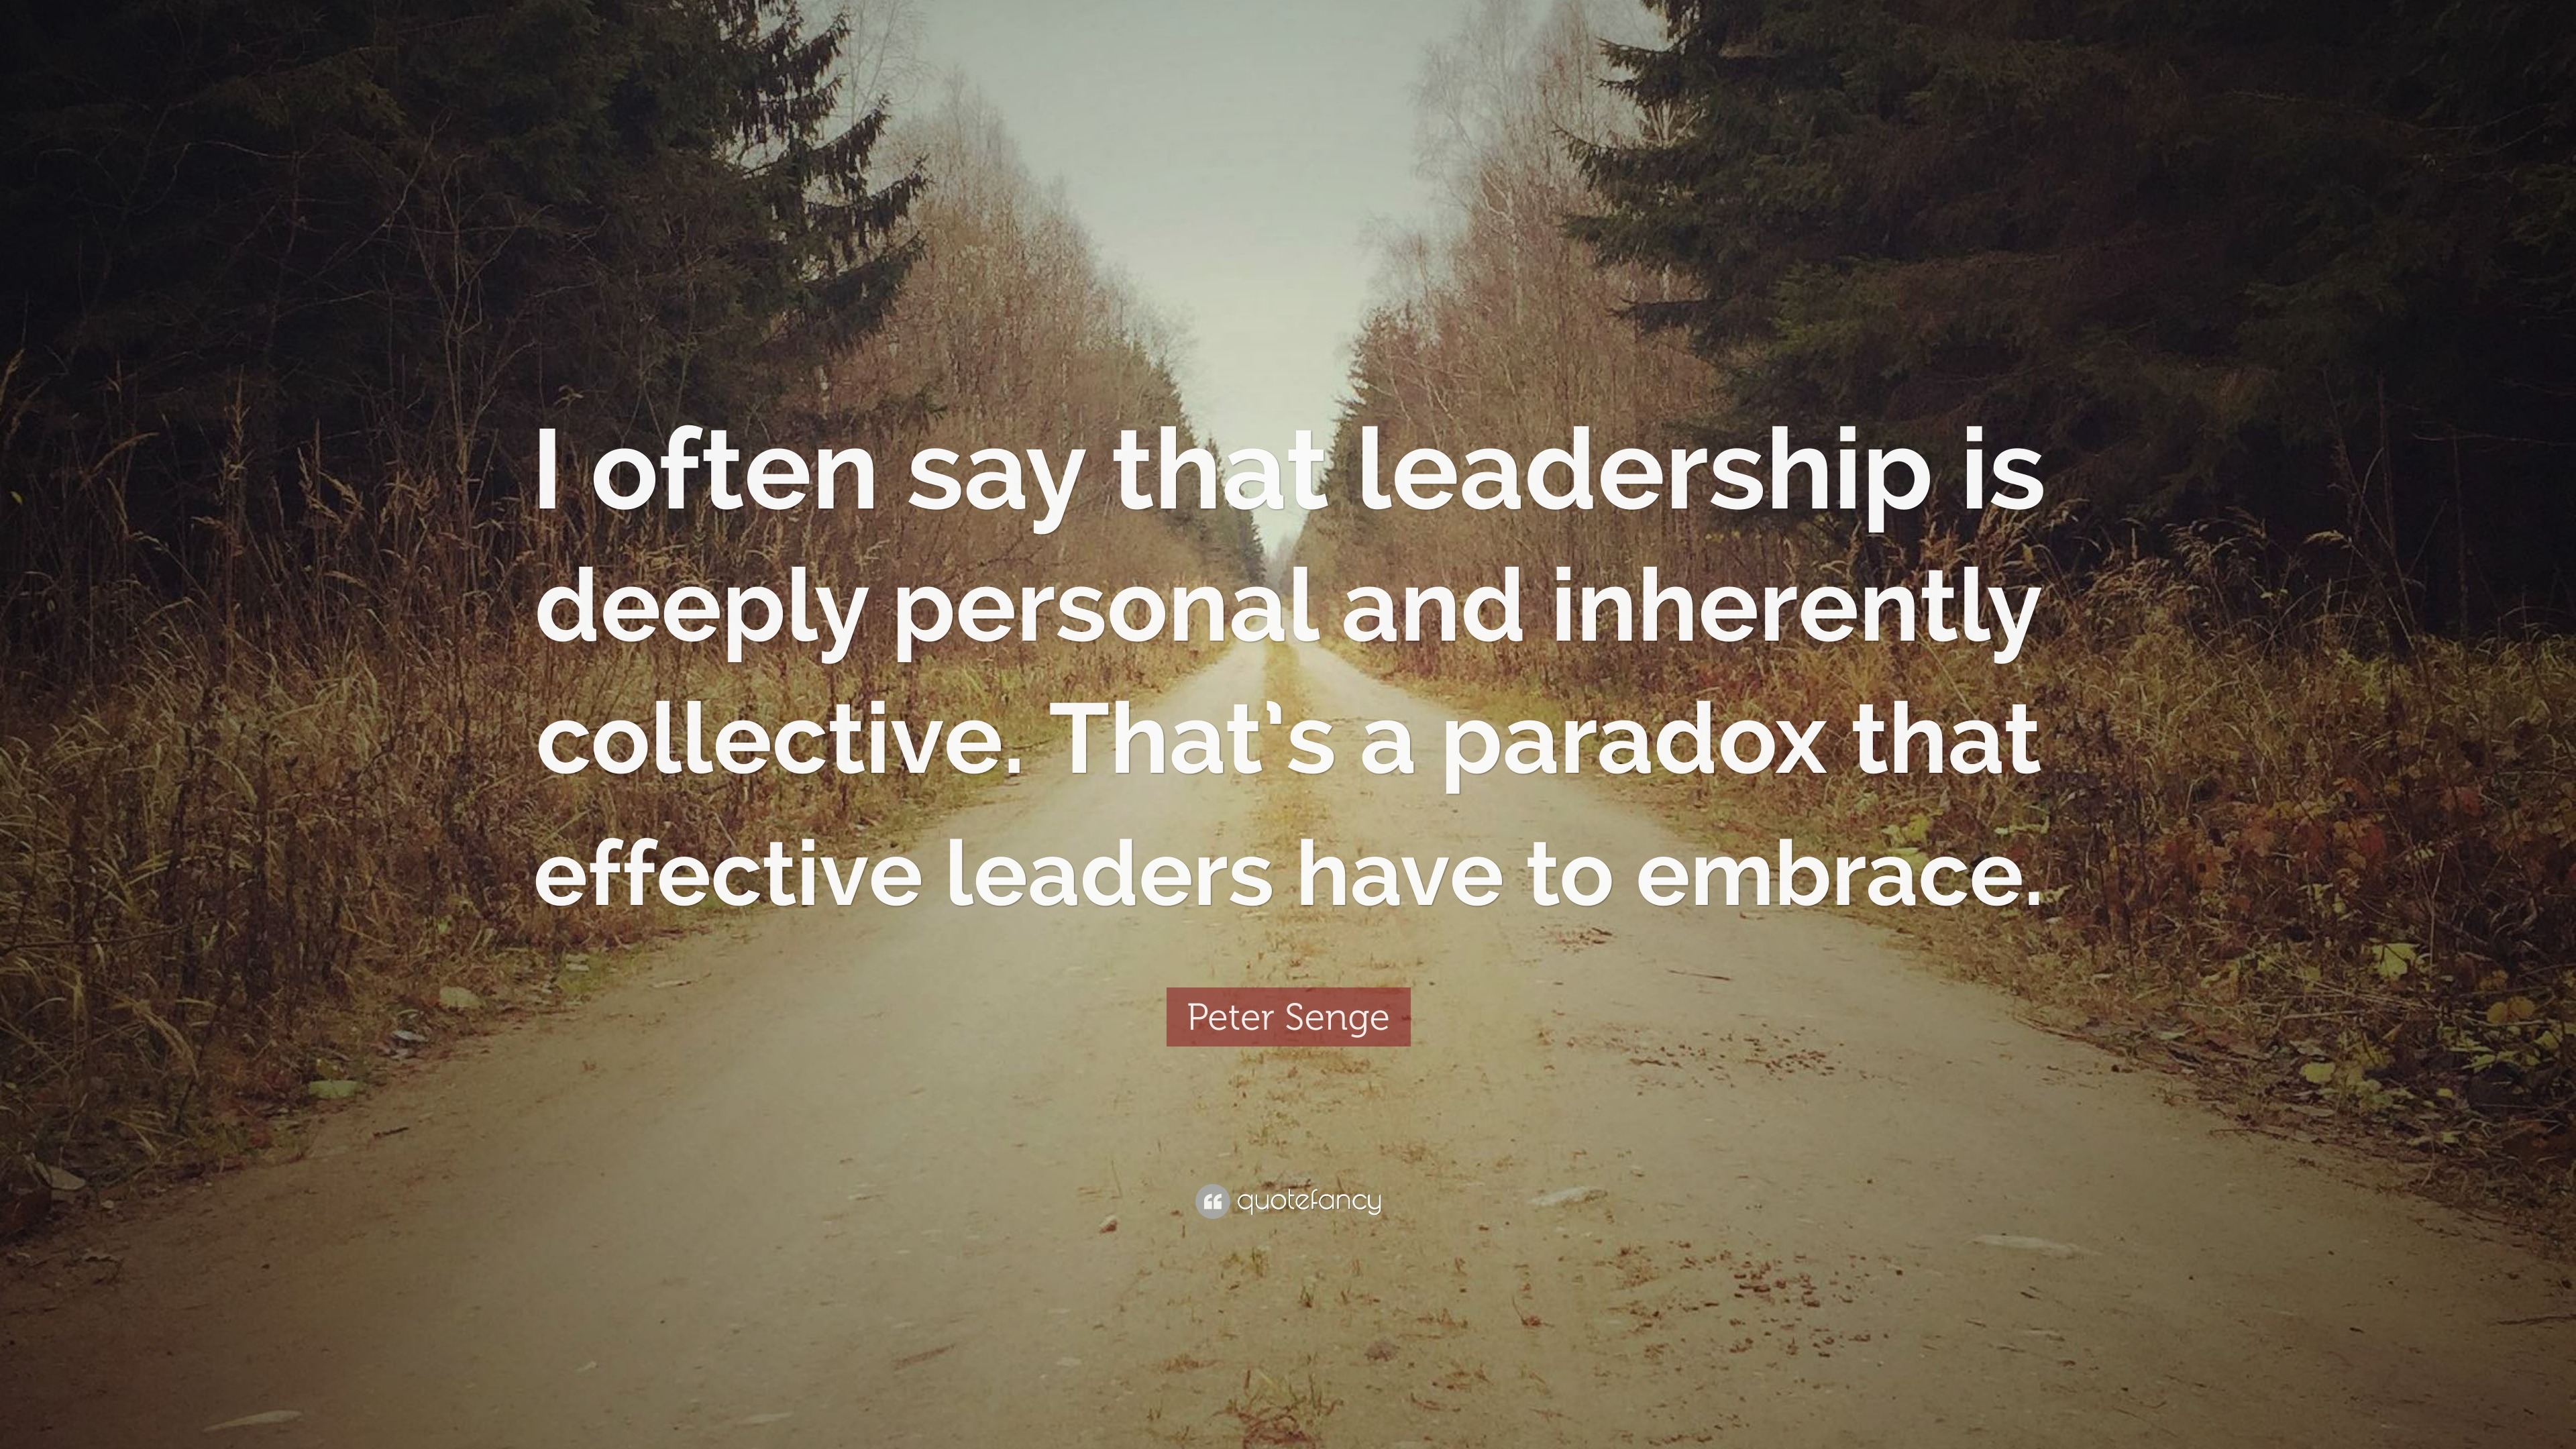 Peter Senge Quote: “I often say that leadership is deeply personal and